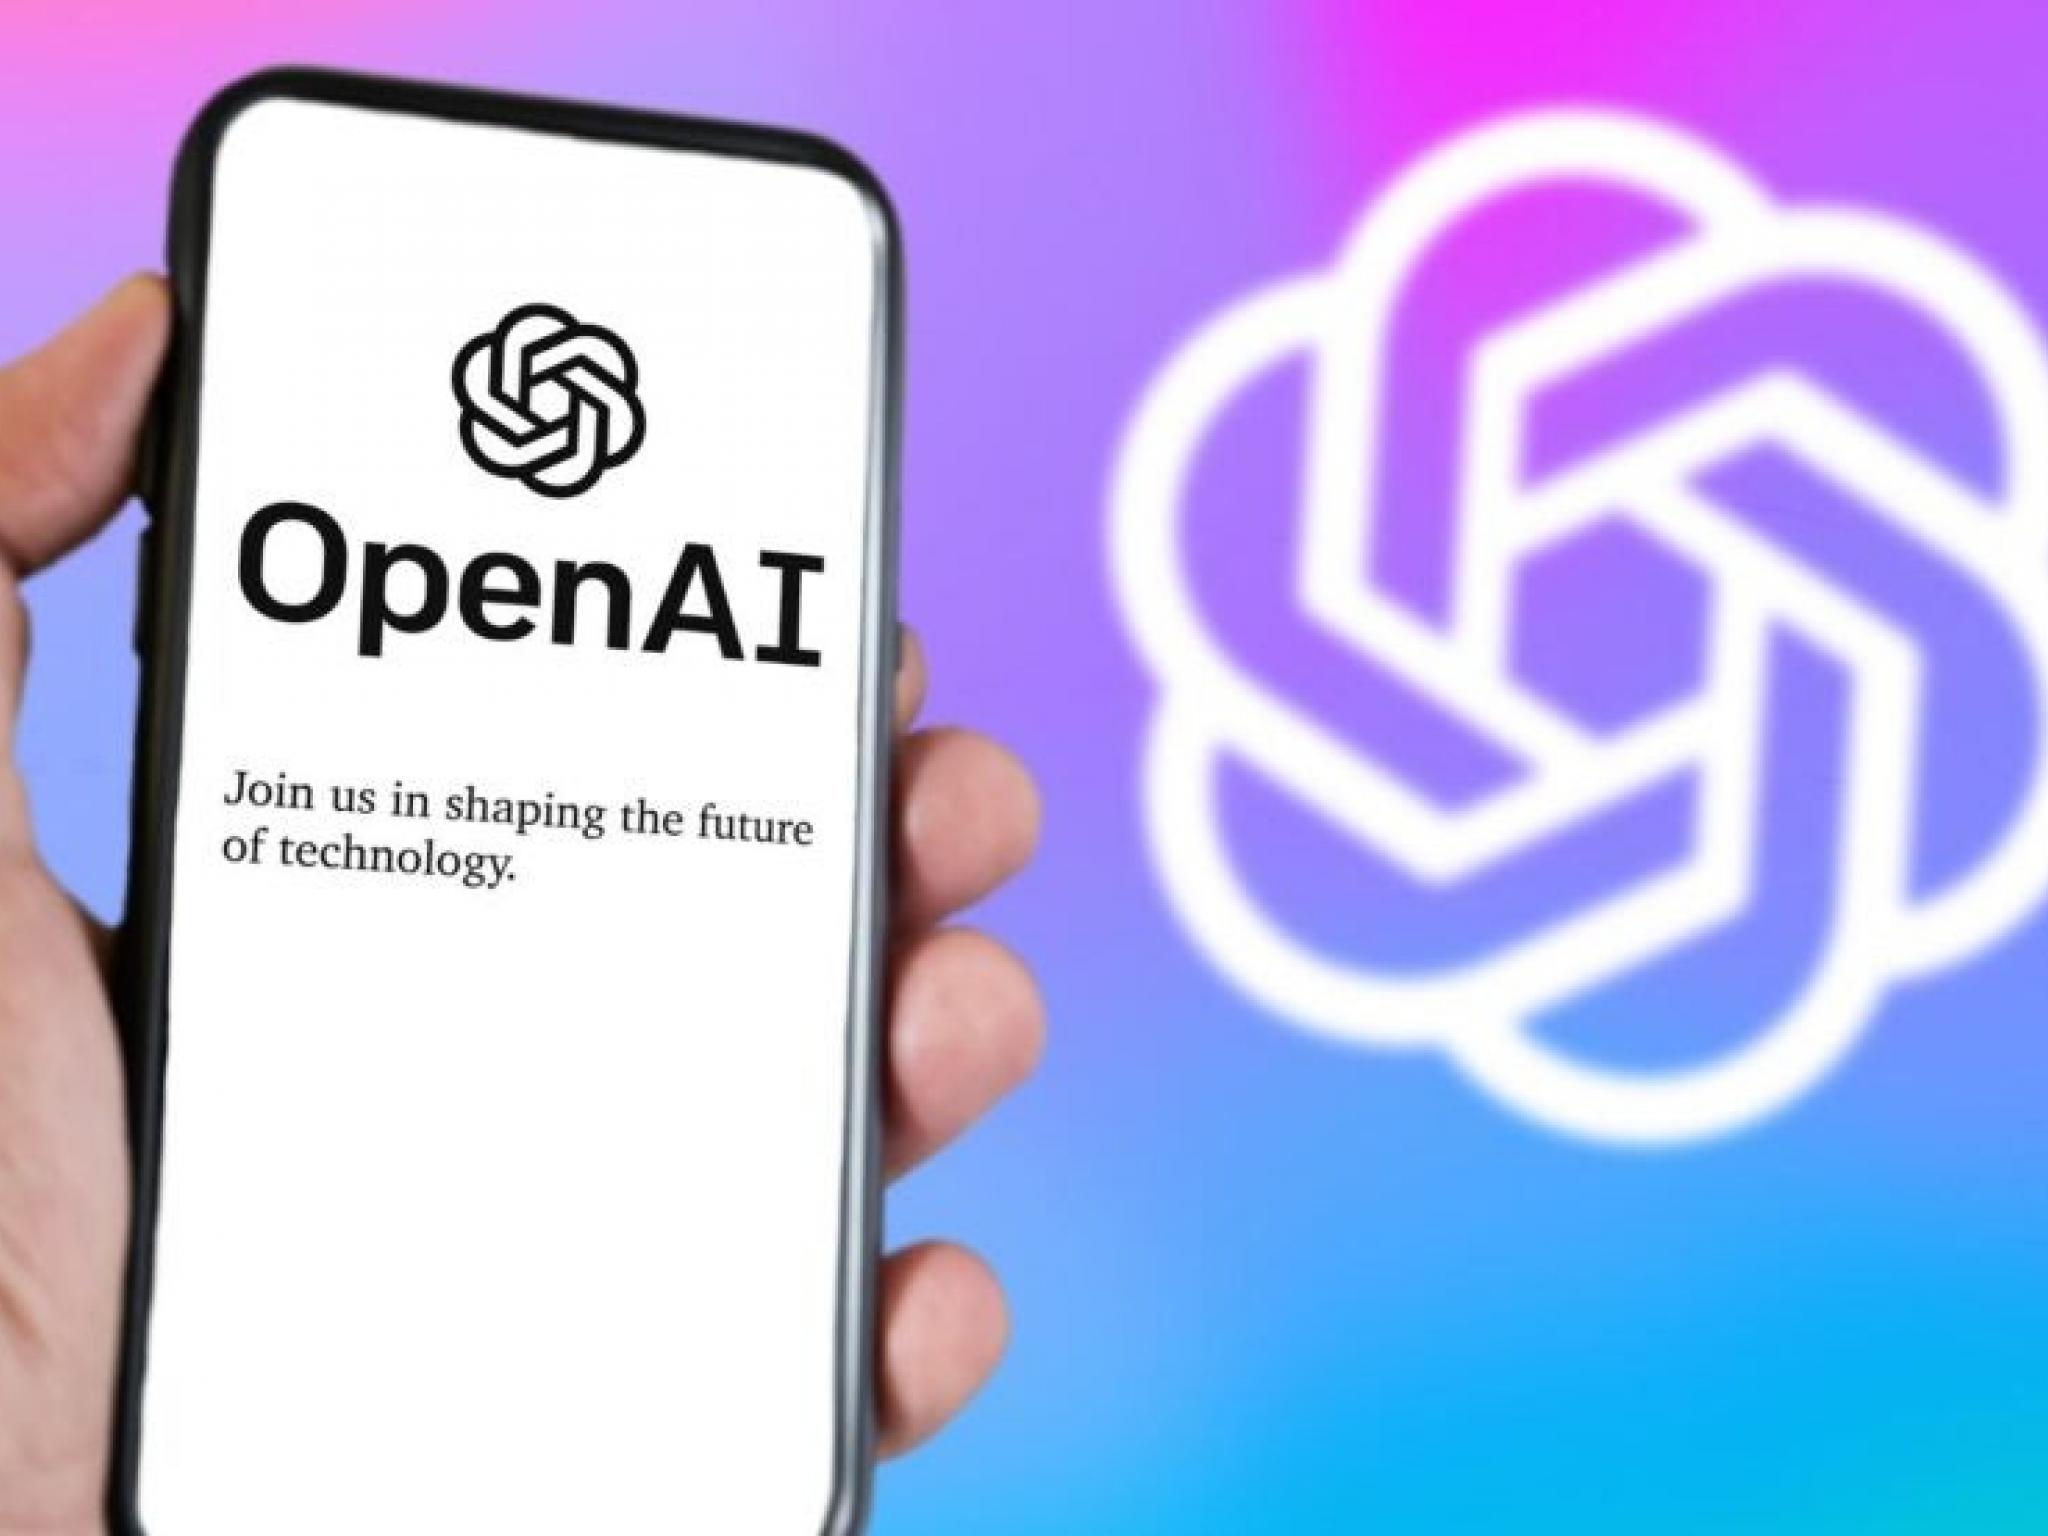  chatgpt-maker-openai-to-restrict-access-to-ai-tools-in-china-amid-rising-tensions-report 